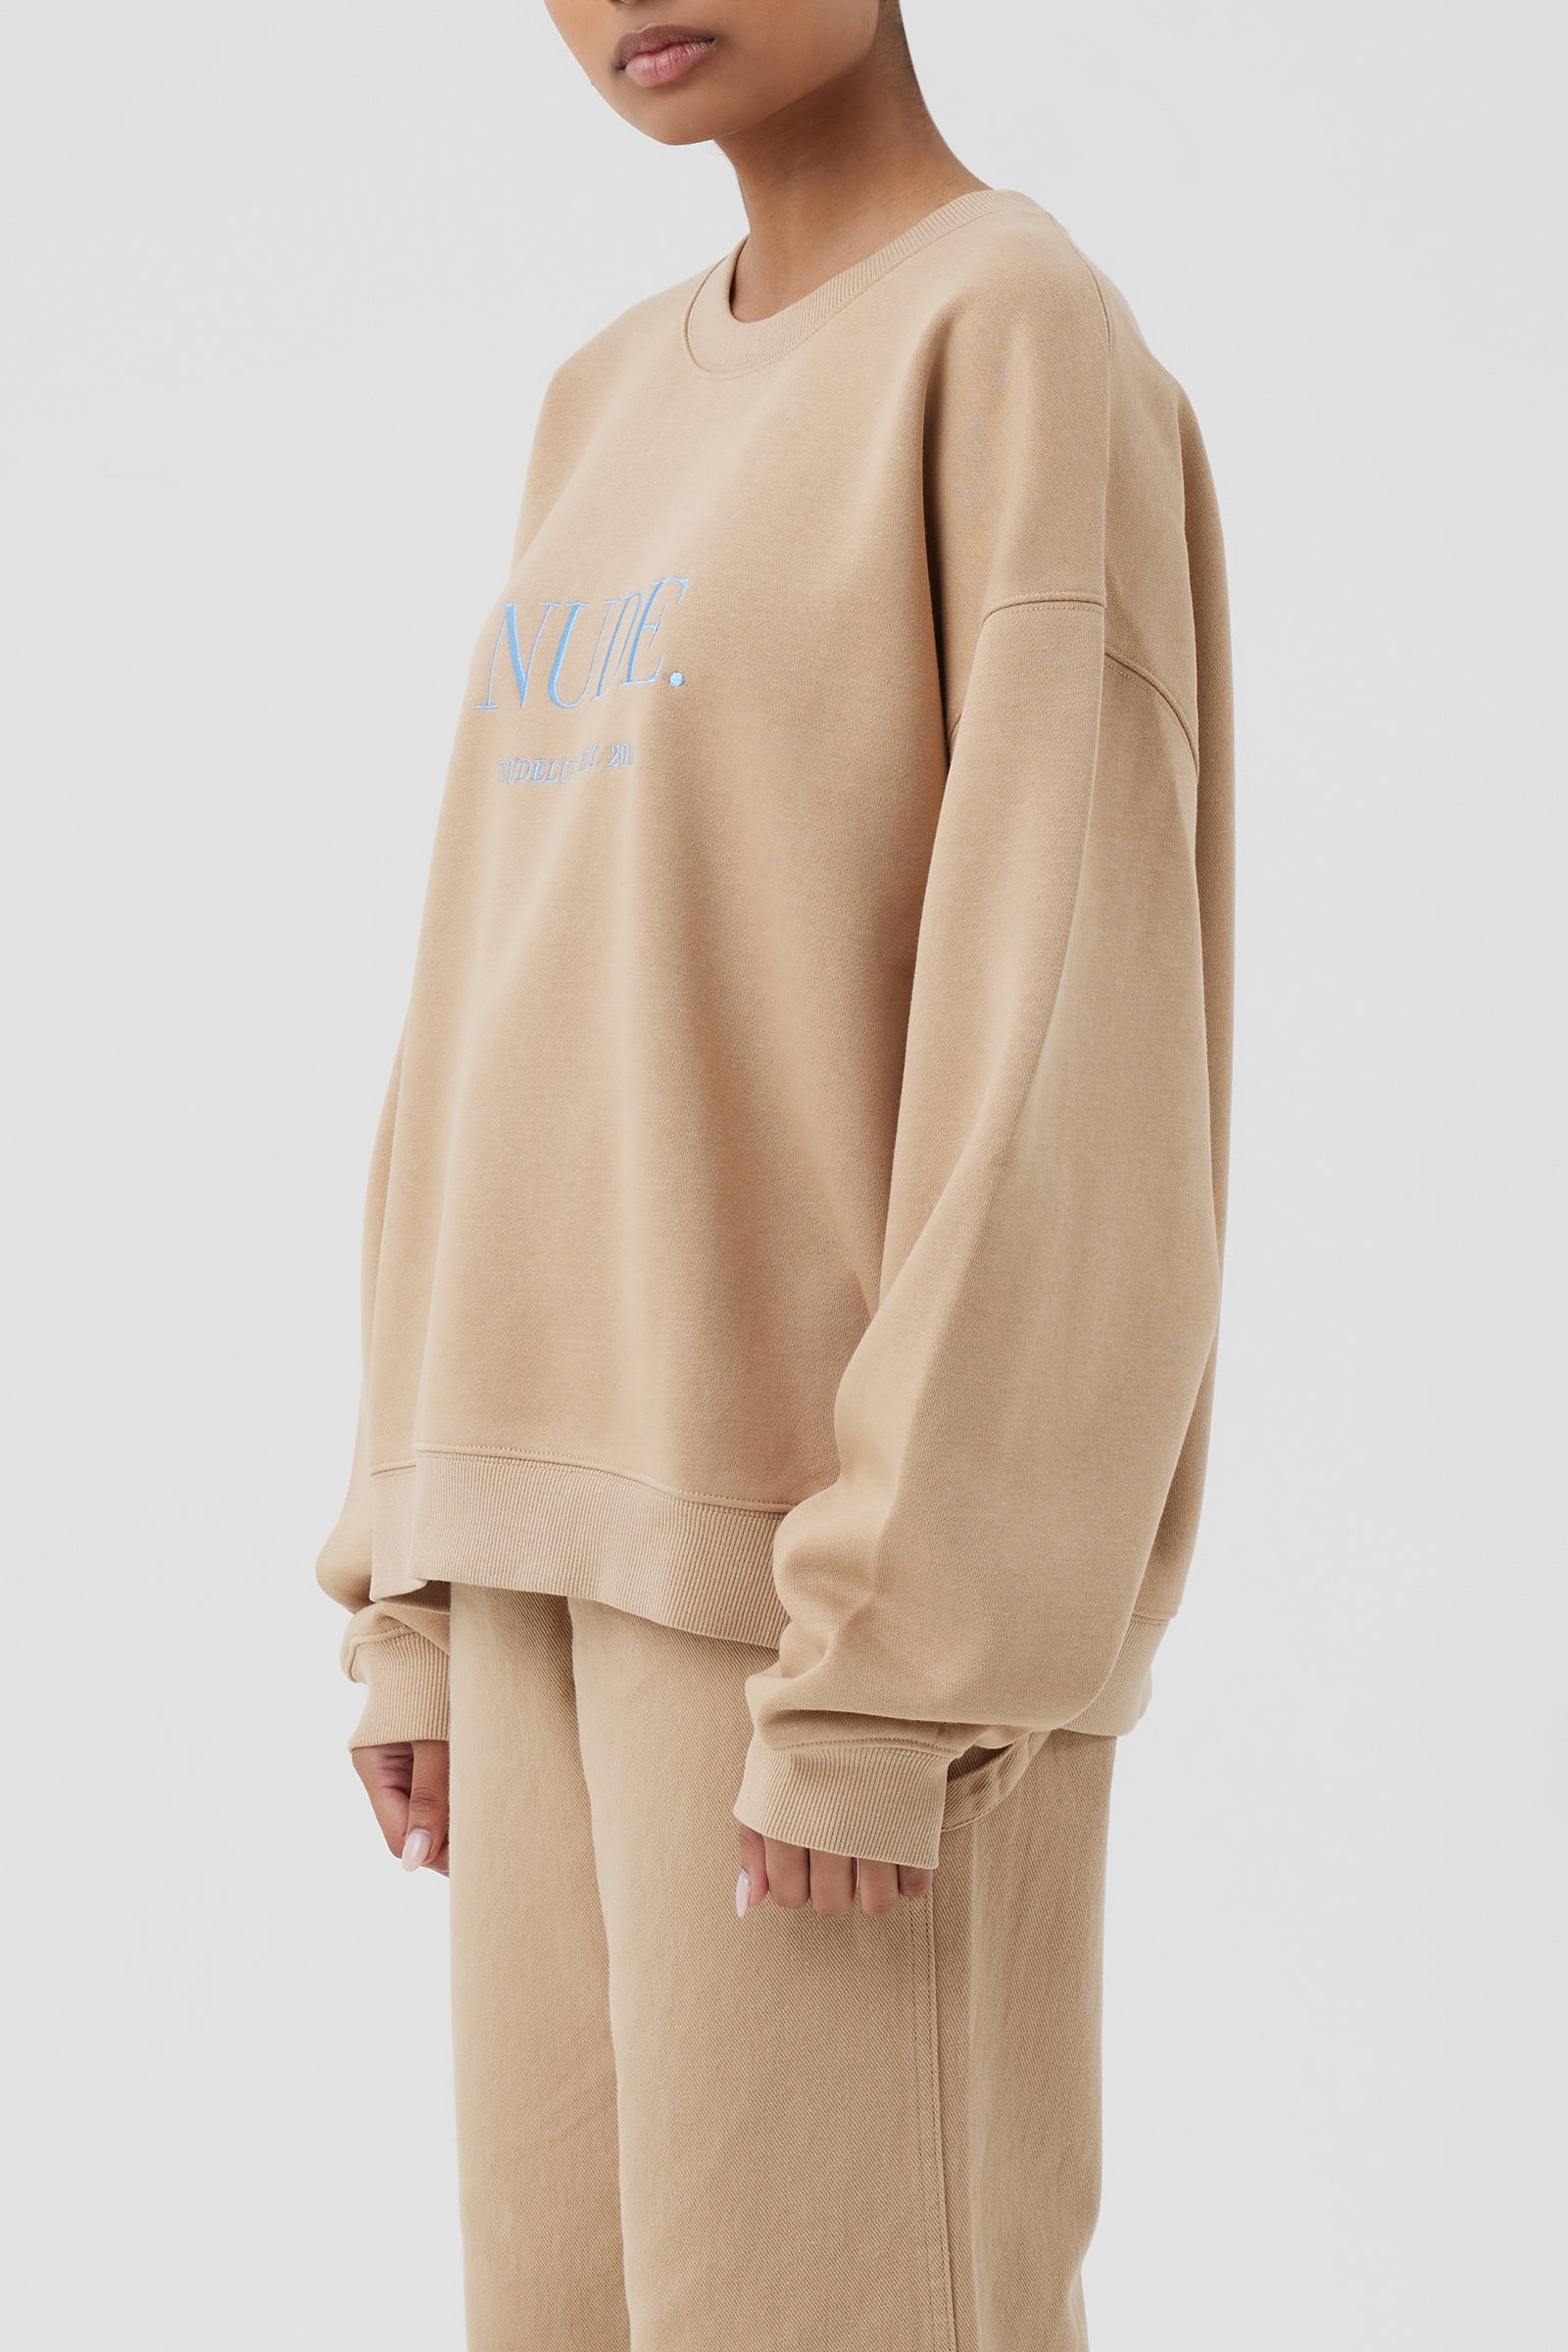 Nude Lucy Nude Sweat In A Light Brown Biscuit Colour 